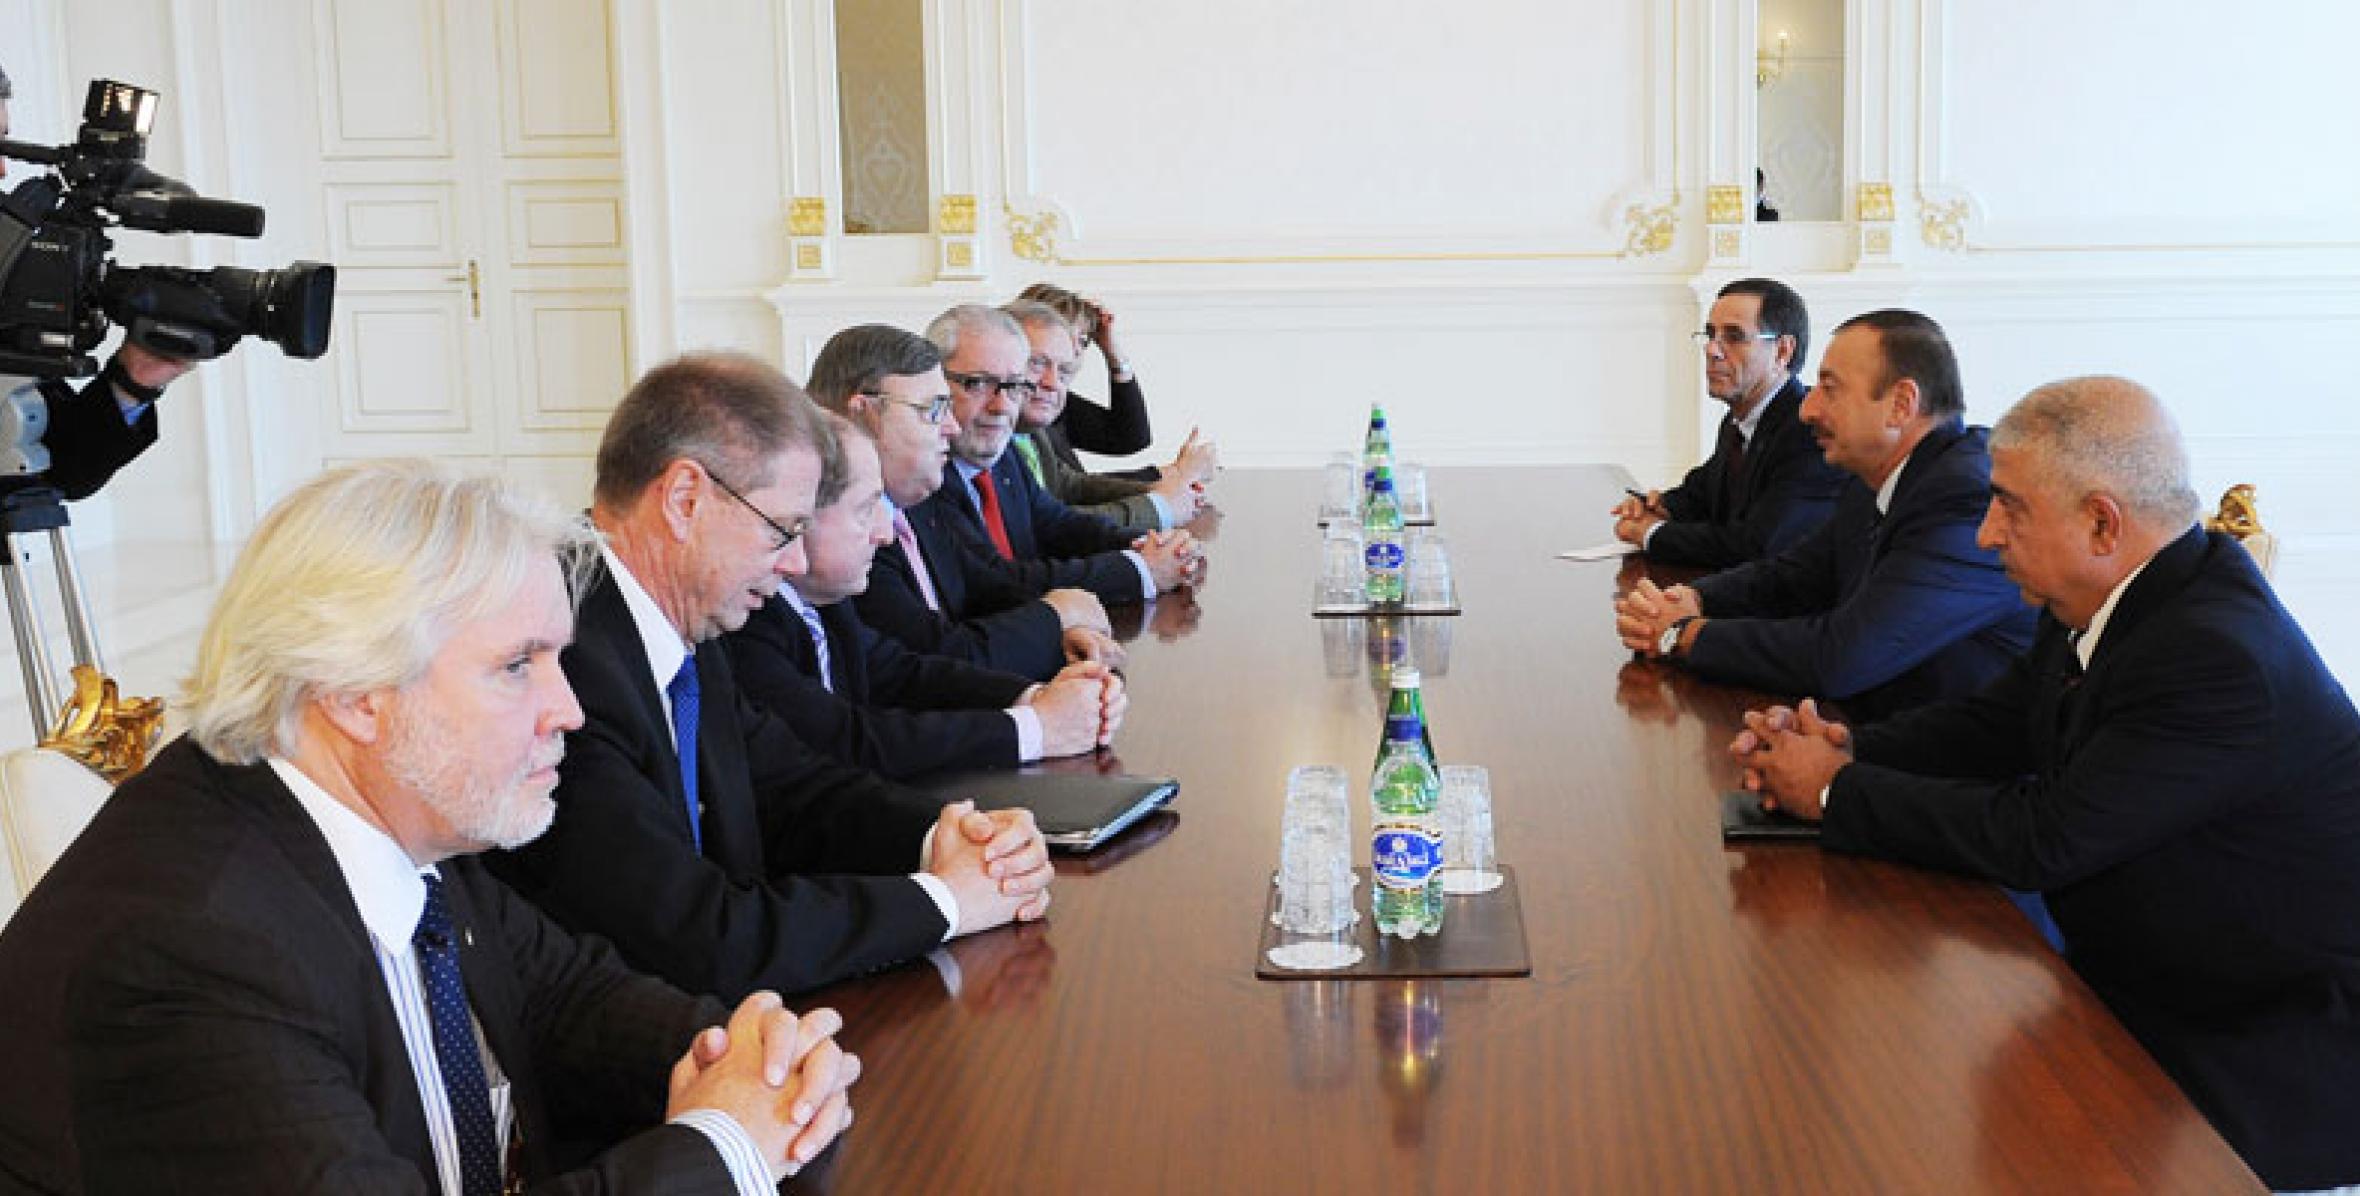 Ilham Aliyev received the head of PACE Special Committee for the pre-election mission Paul Wille